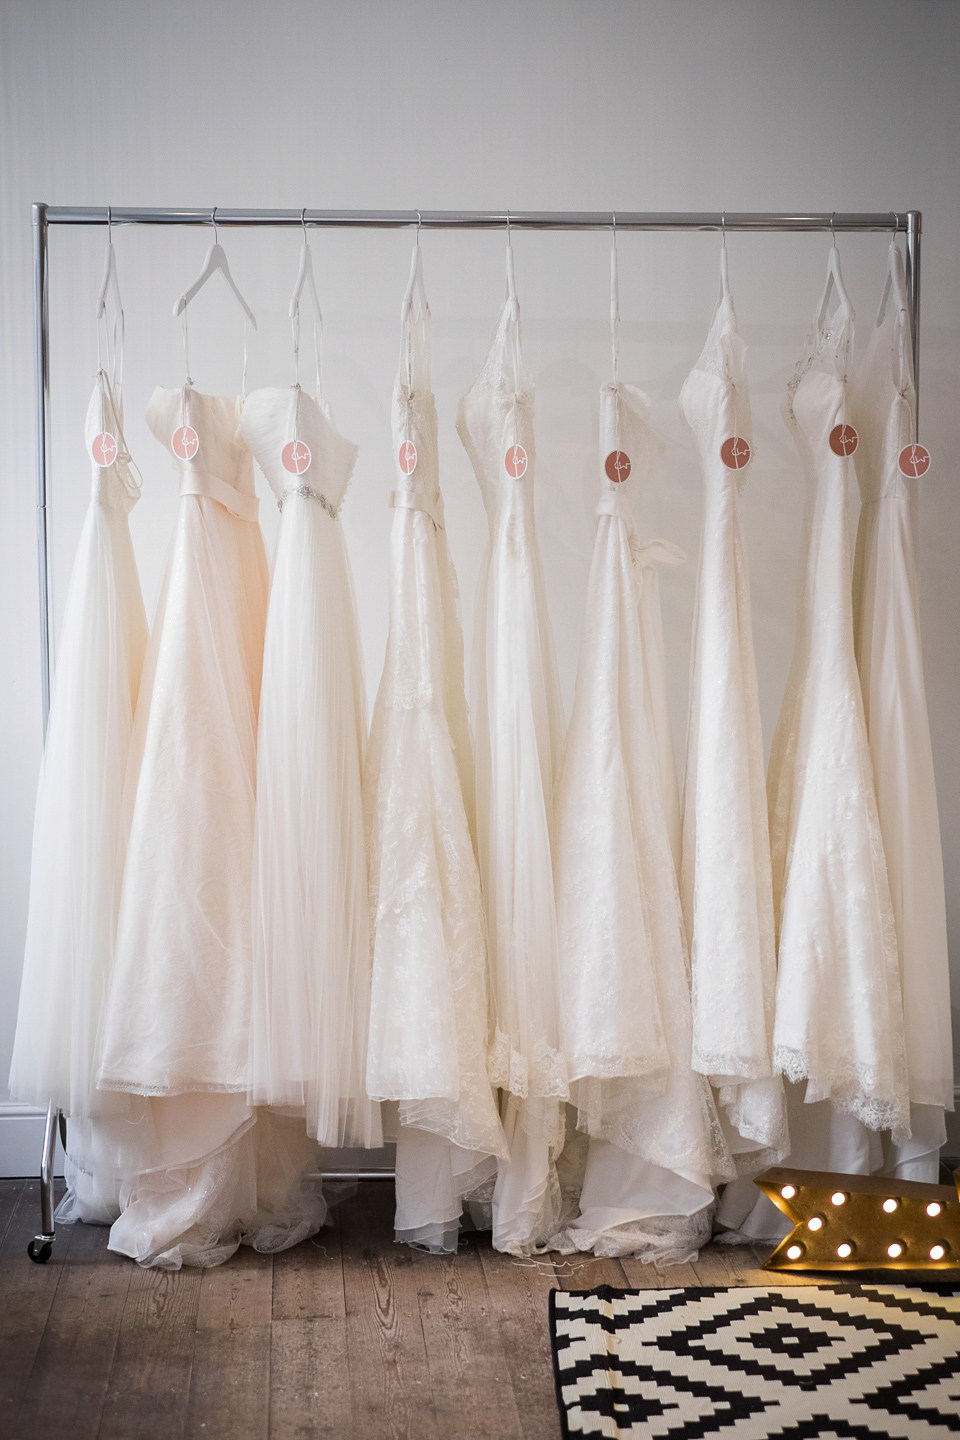 Flossy & Willow - Wiltershire bridal boutique. Photography by Evoke Pictures.